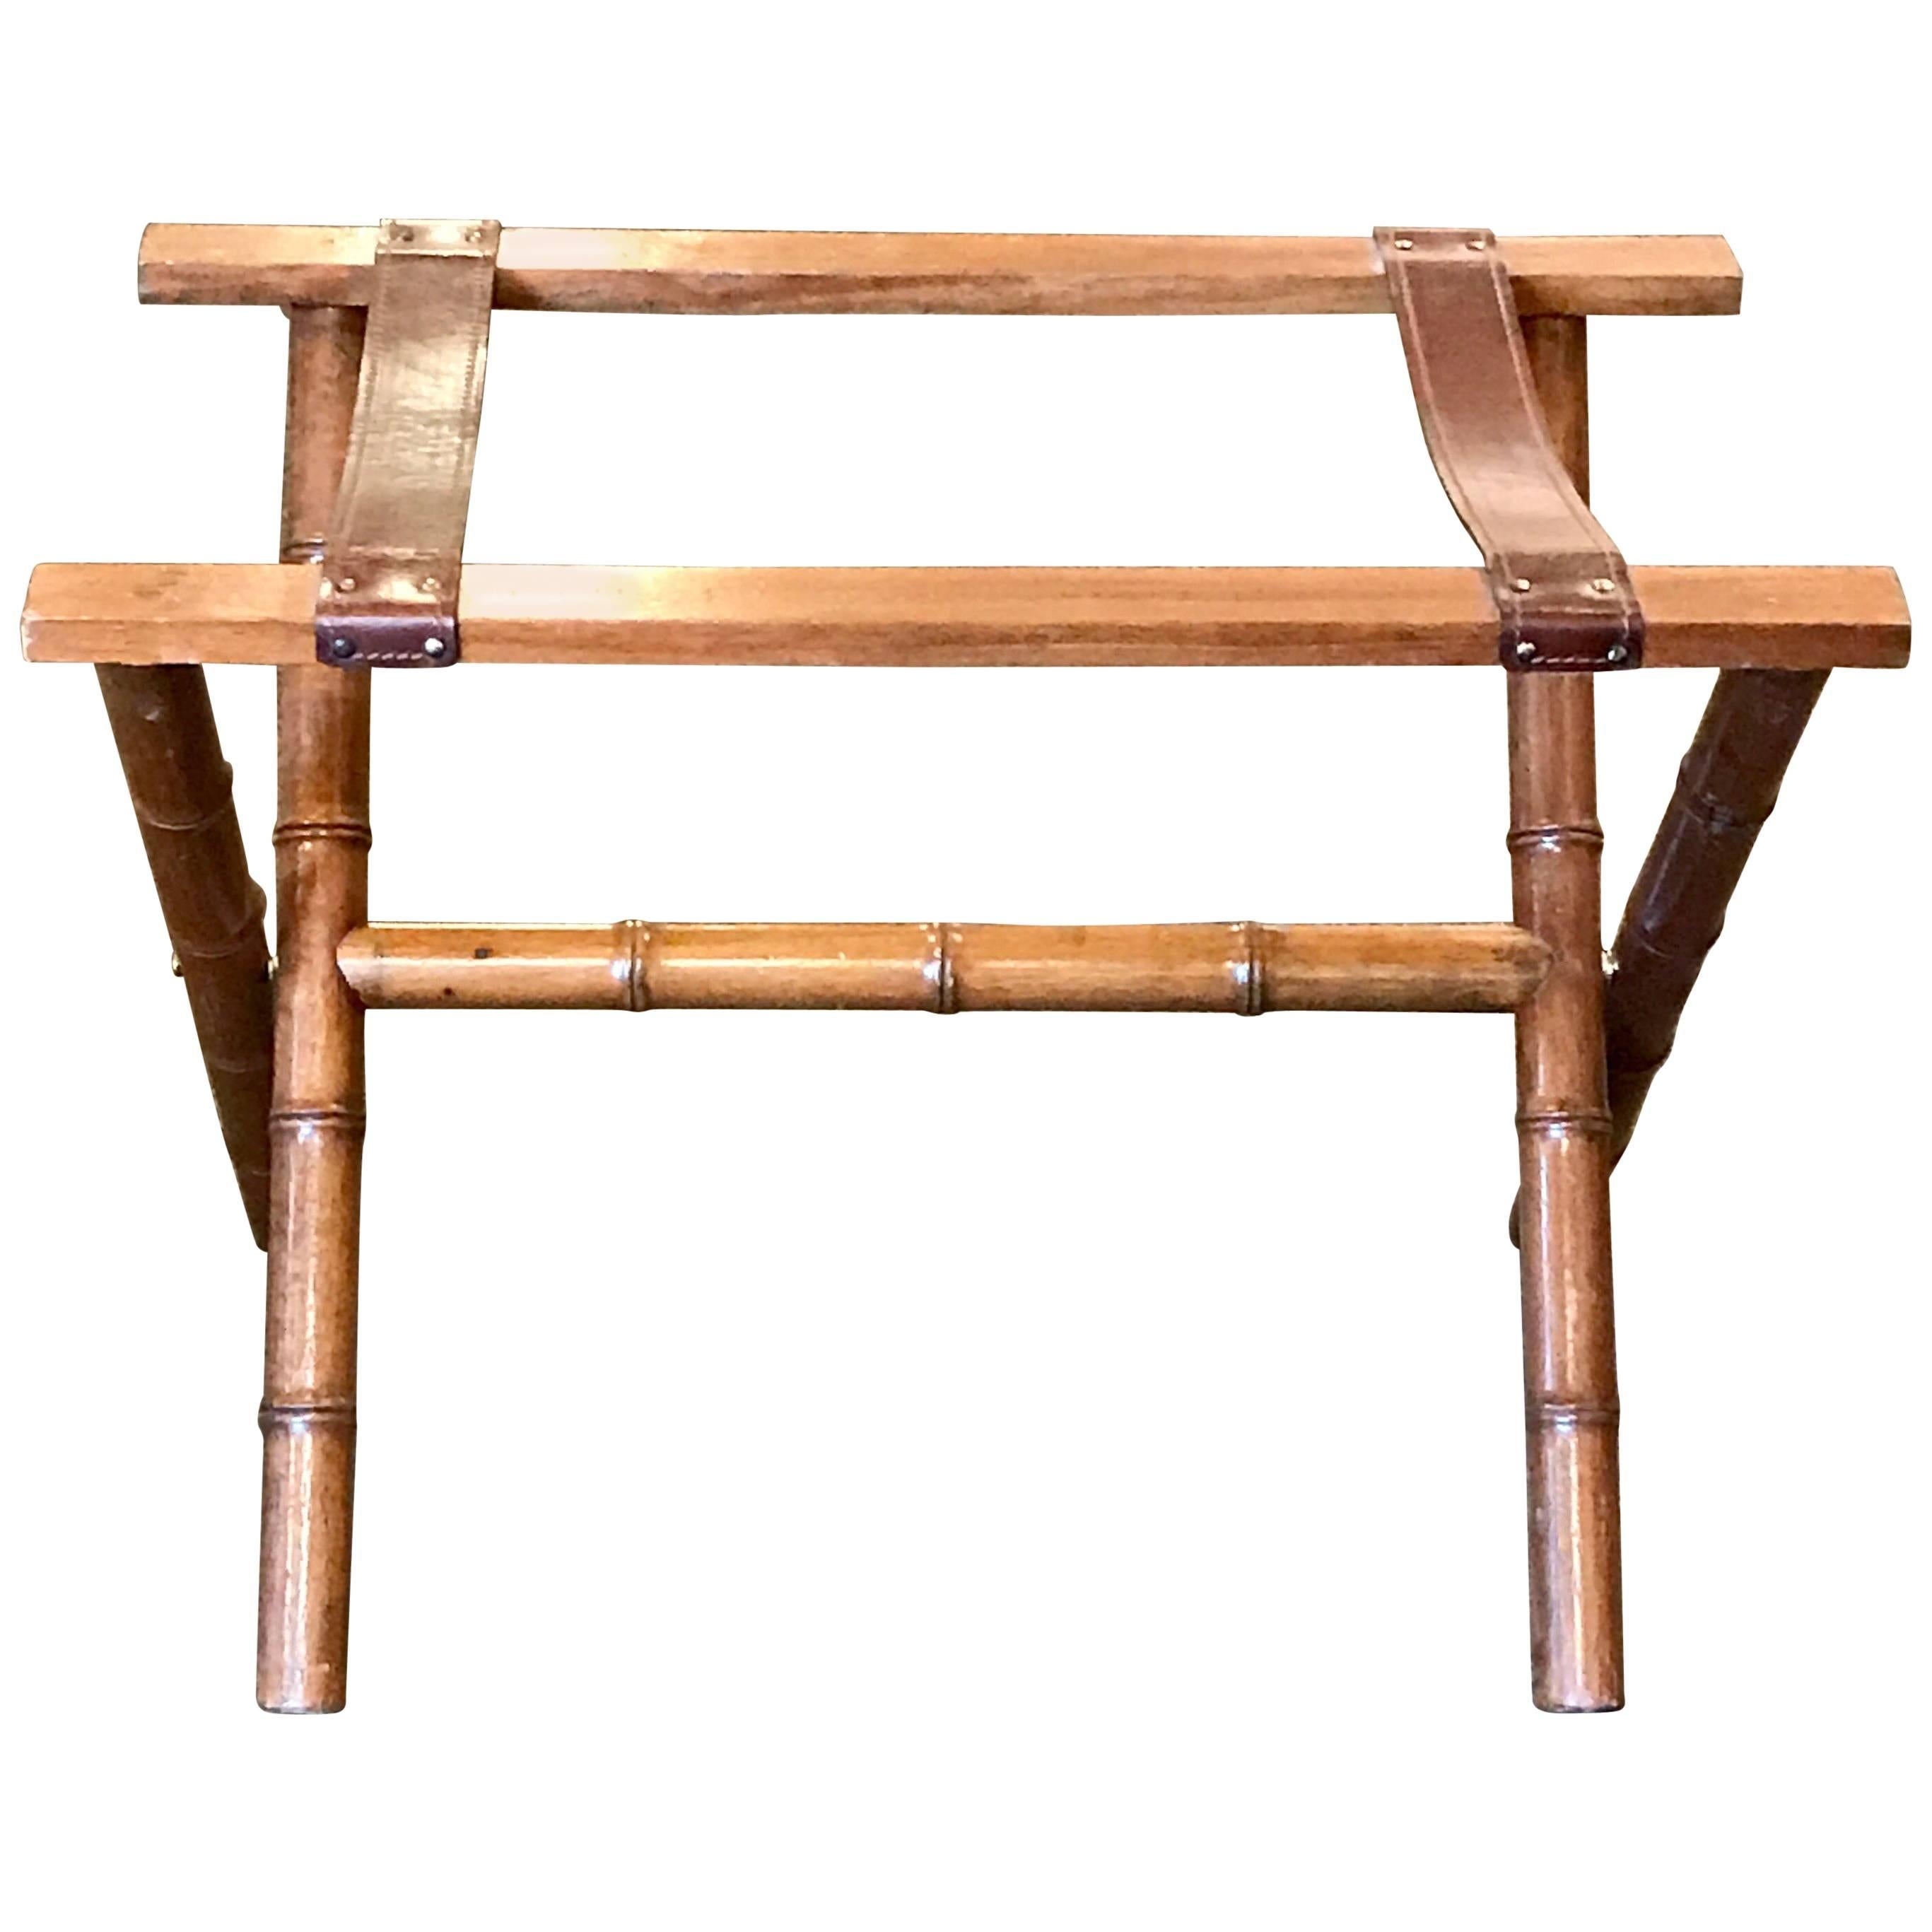 Jacques Adnet Style Faux Bamboo and Leather Luggage Rack